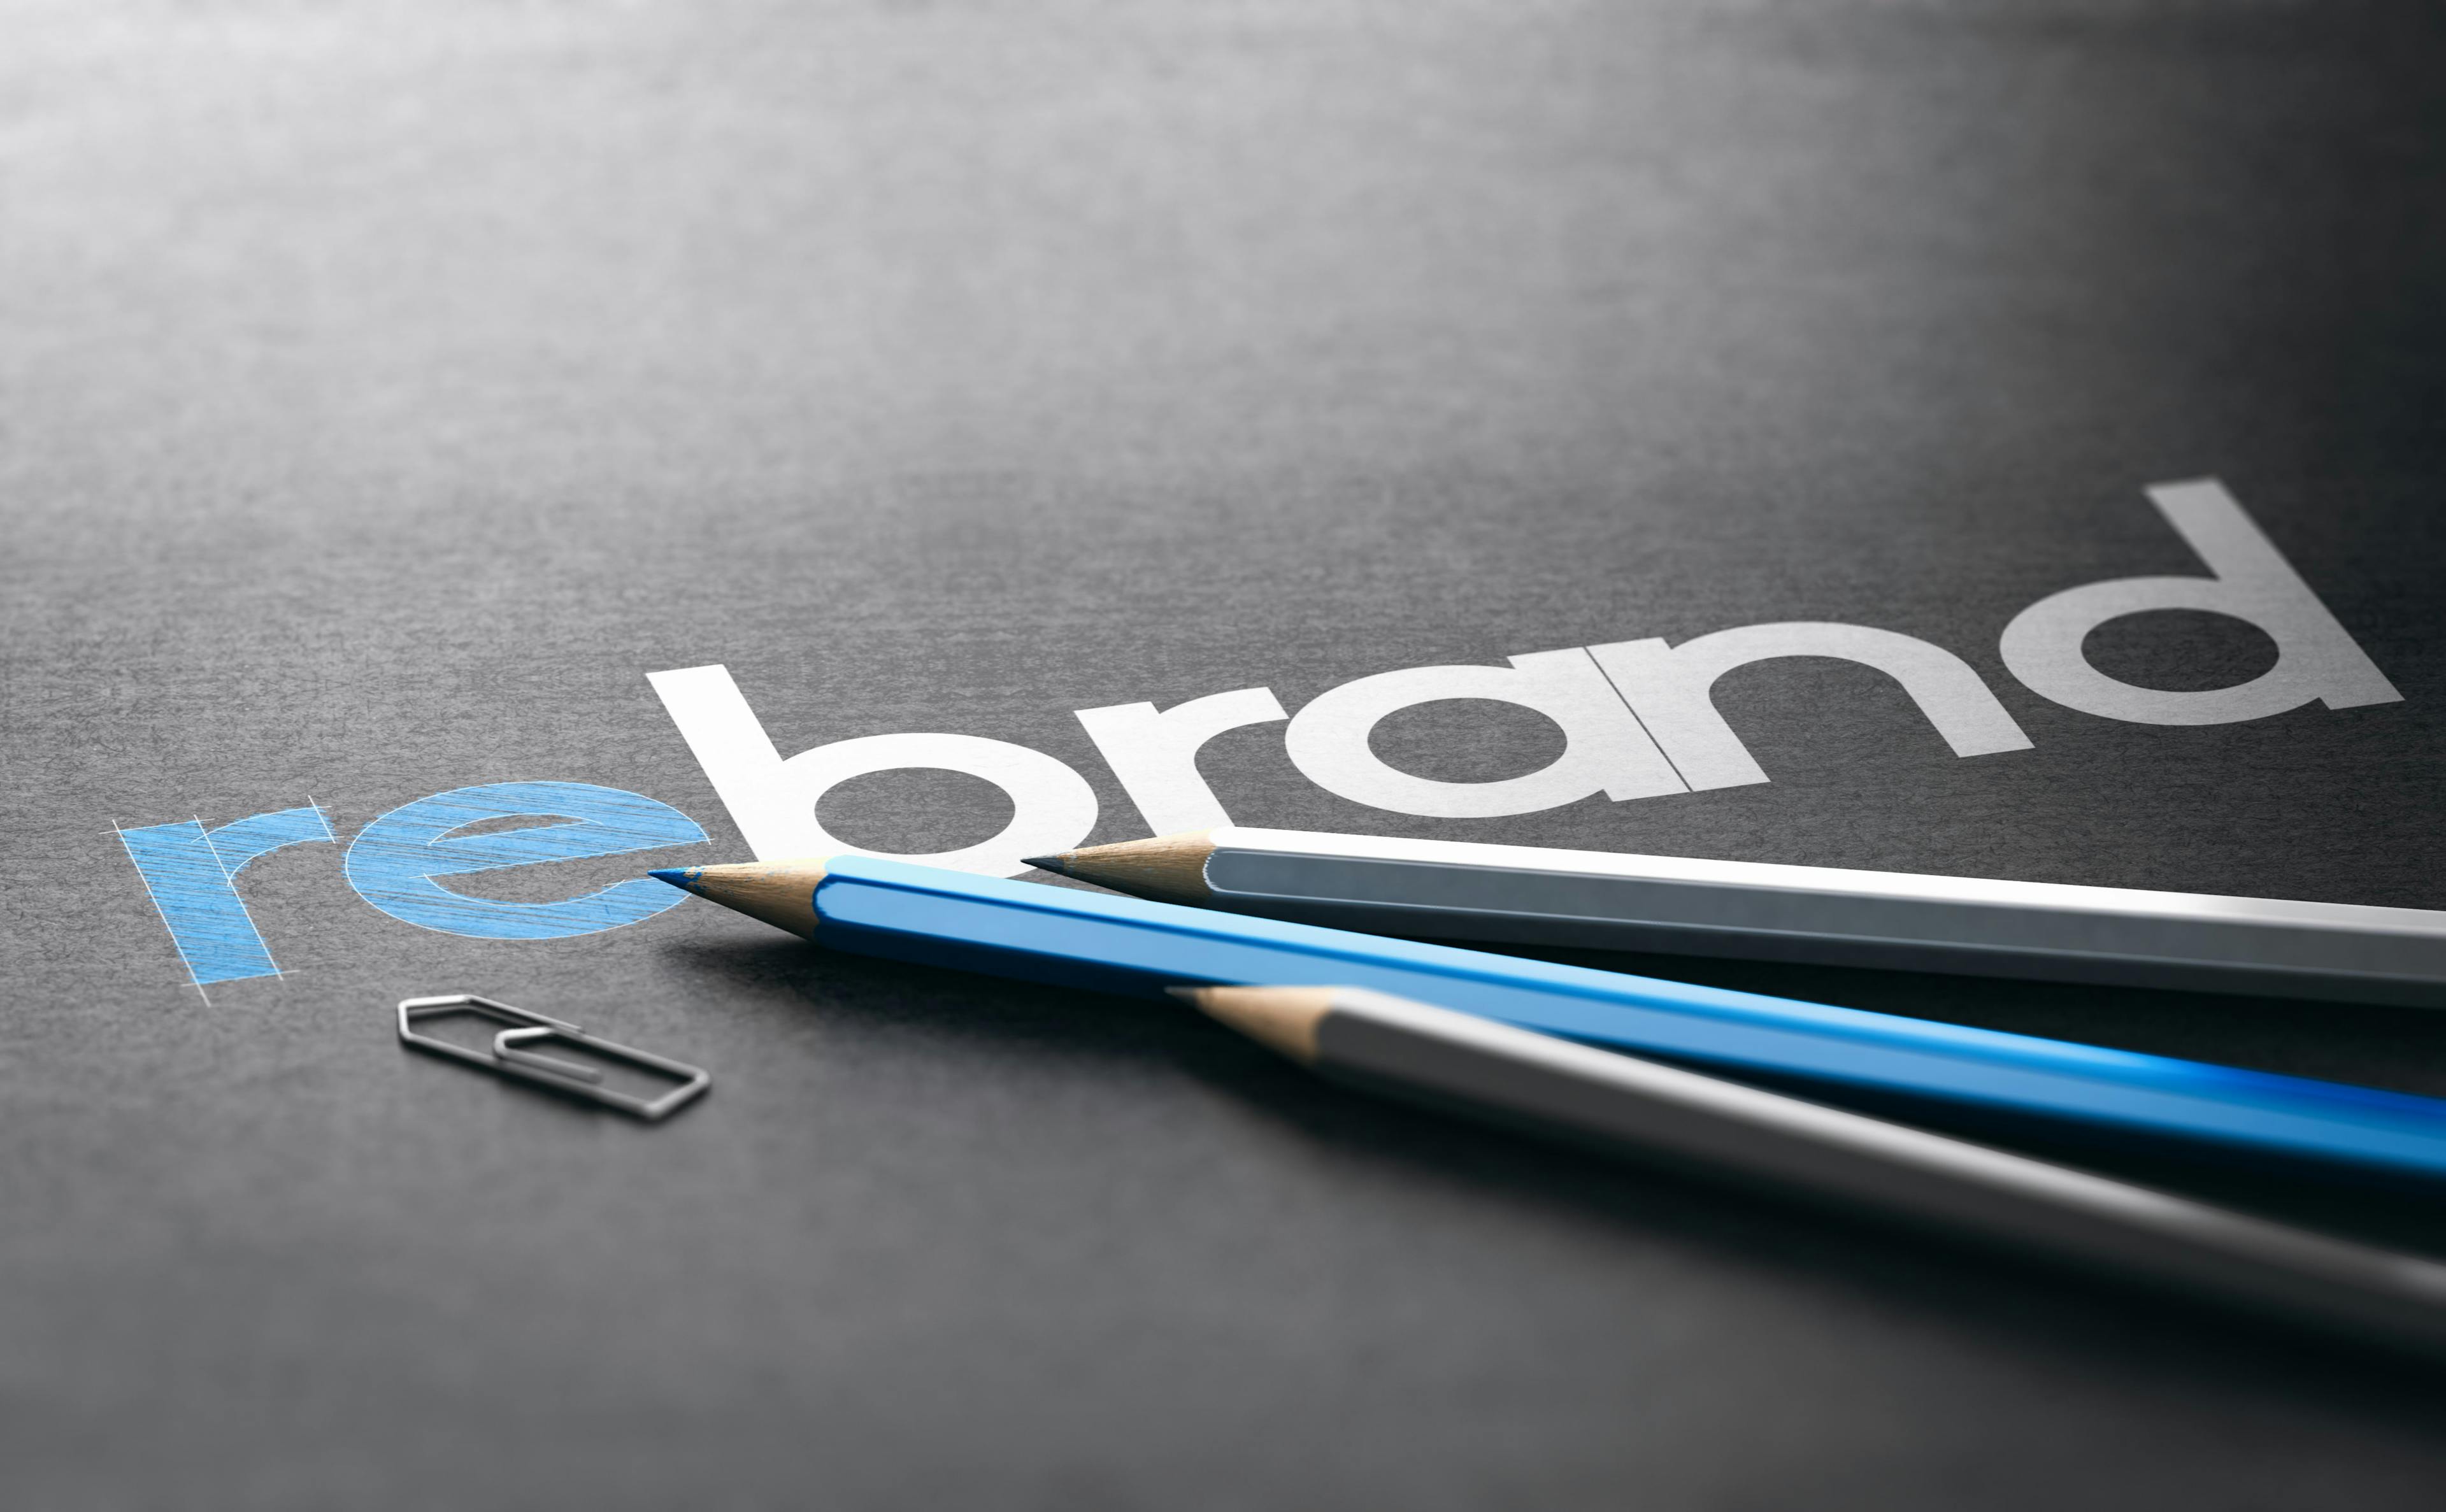 Rebrand Strategy, Marketing and Brand Management Concept: © Olivier Le Moal - stock.adobe.com